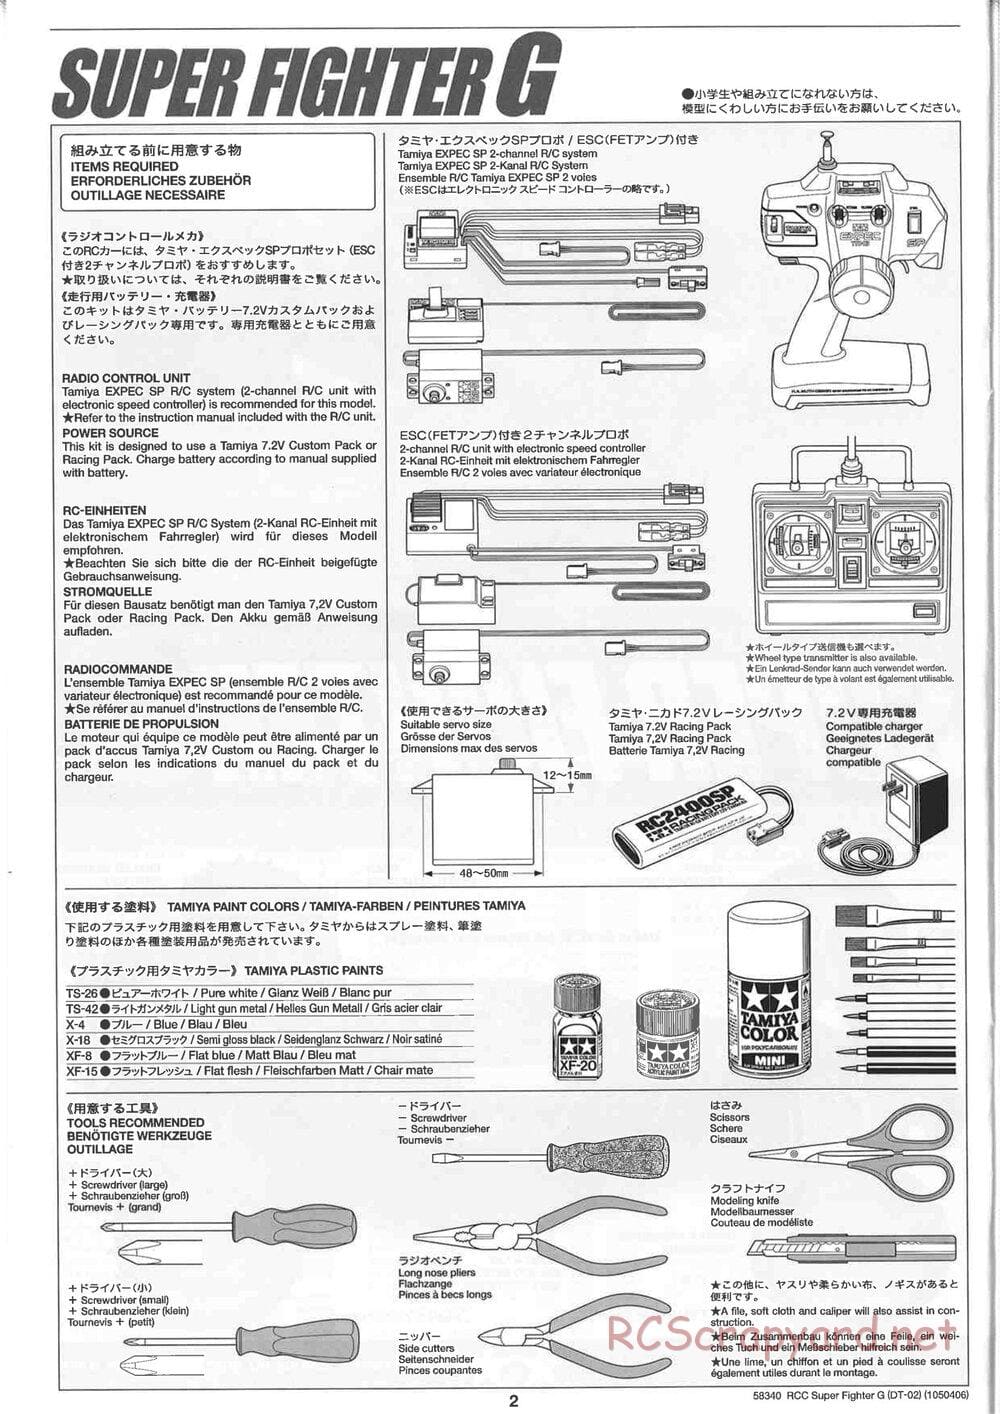 Tamiya - Super Fighter G Chassis - Manual - Page 2